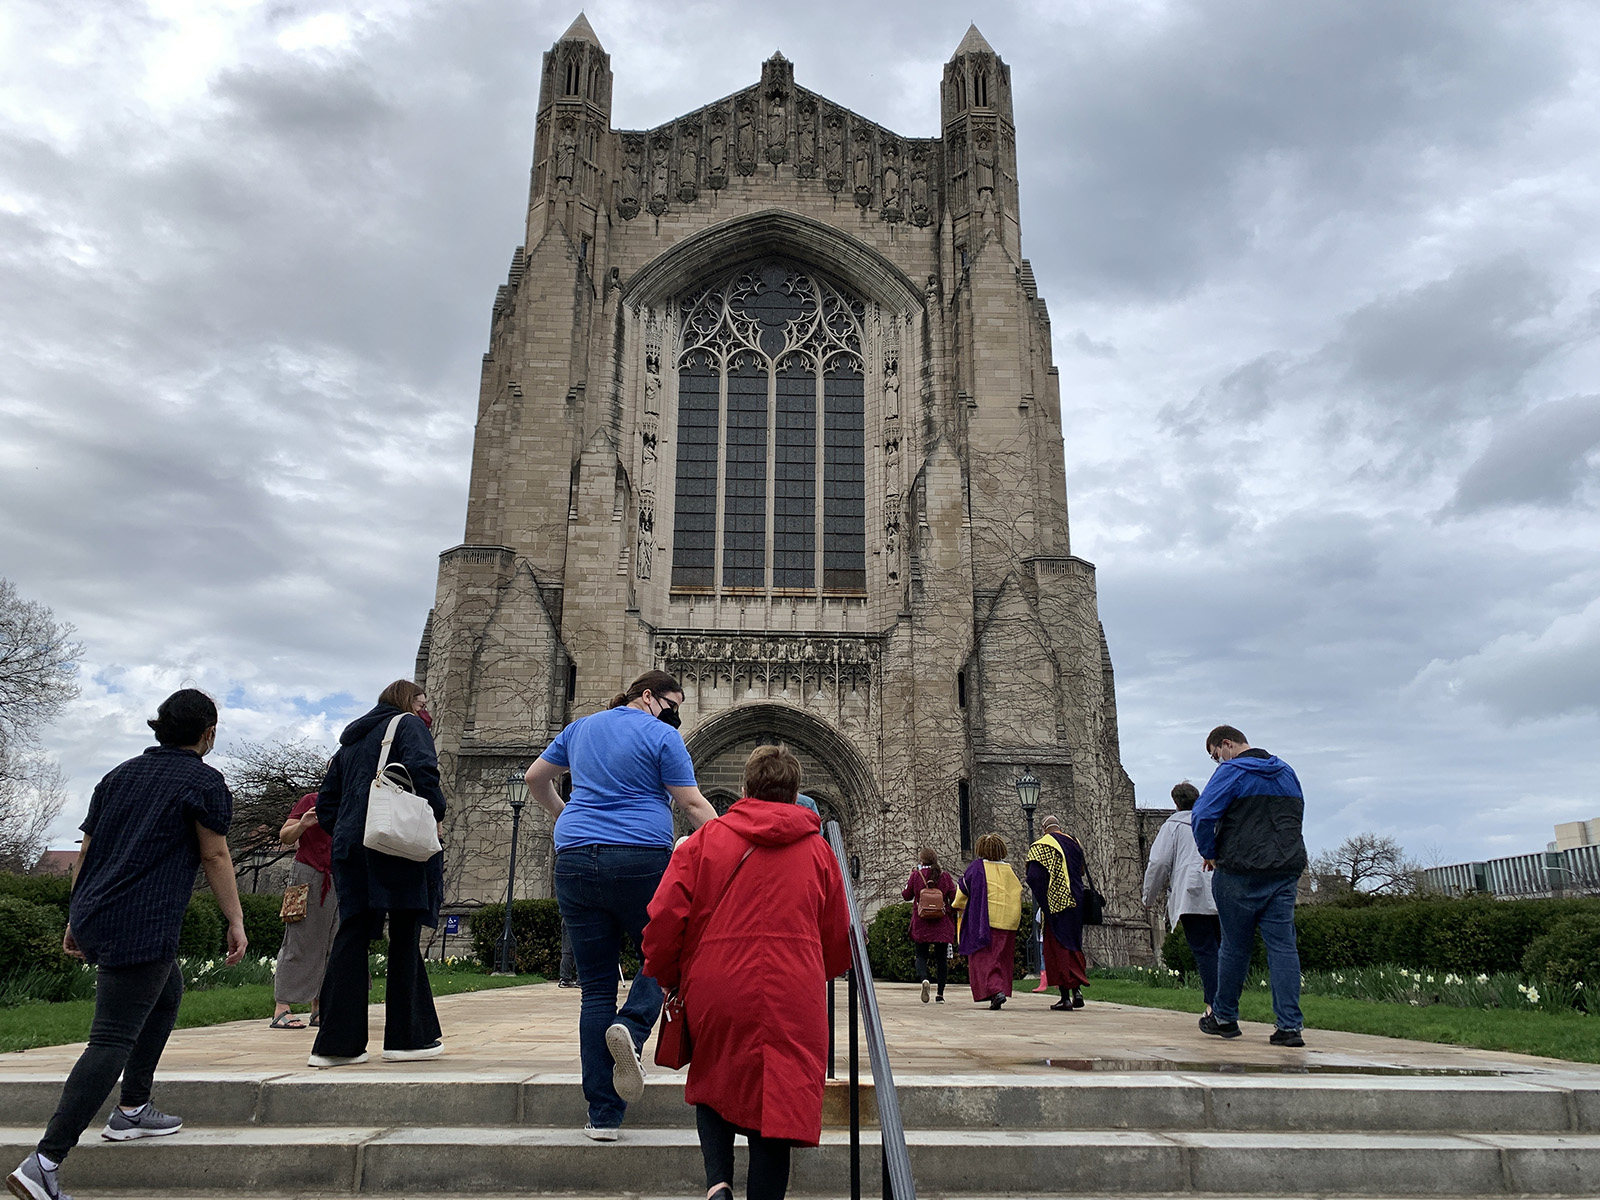 Chicago Interfaith Trolley Tour participants stop at Rockefeller Memorial Chapel at the University of Chicago, Sunday, April 24, 2022. RNS photo by Bob Smietana